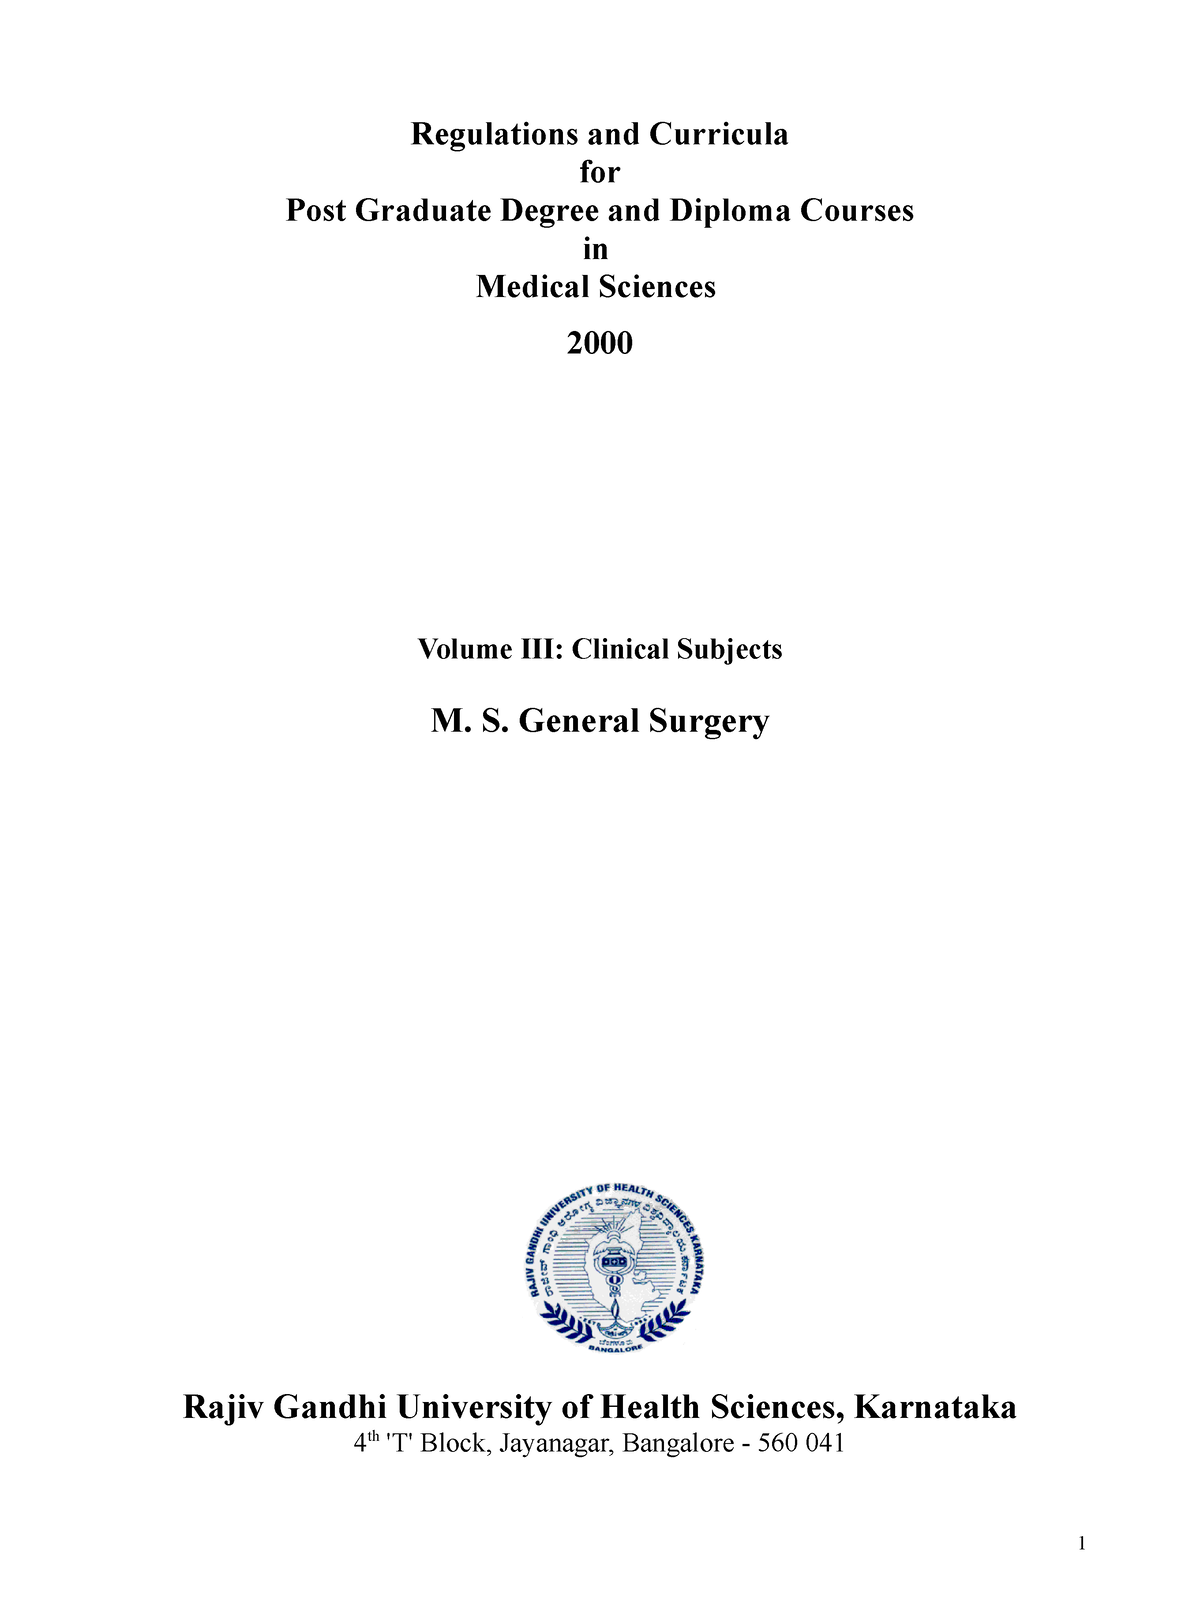 general surgery thesis topics rguhs